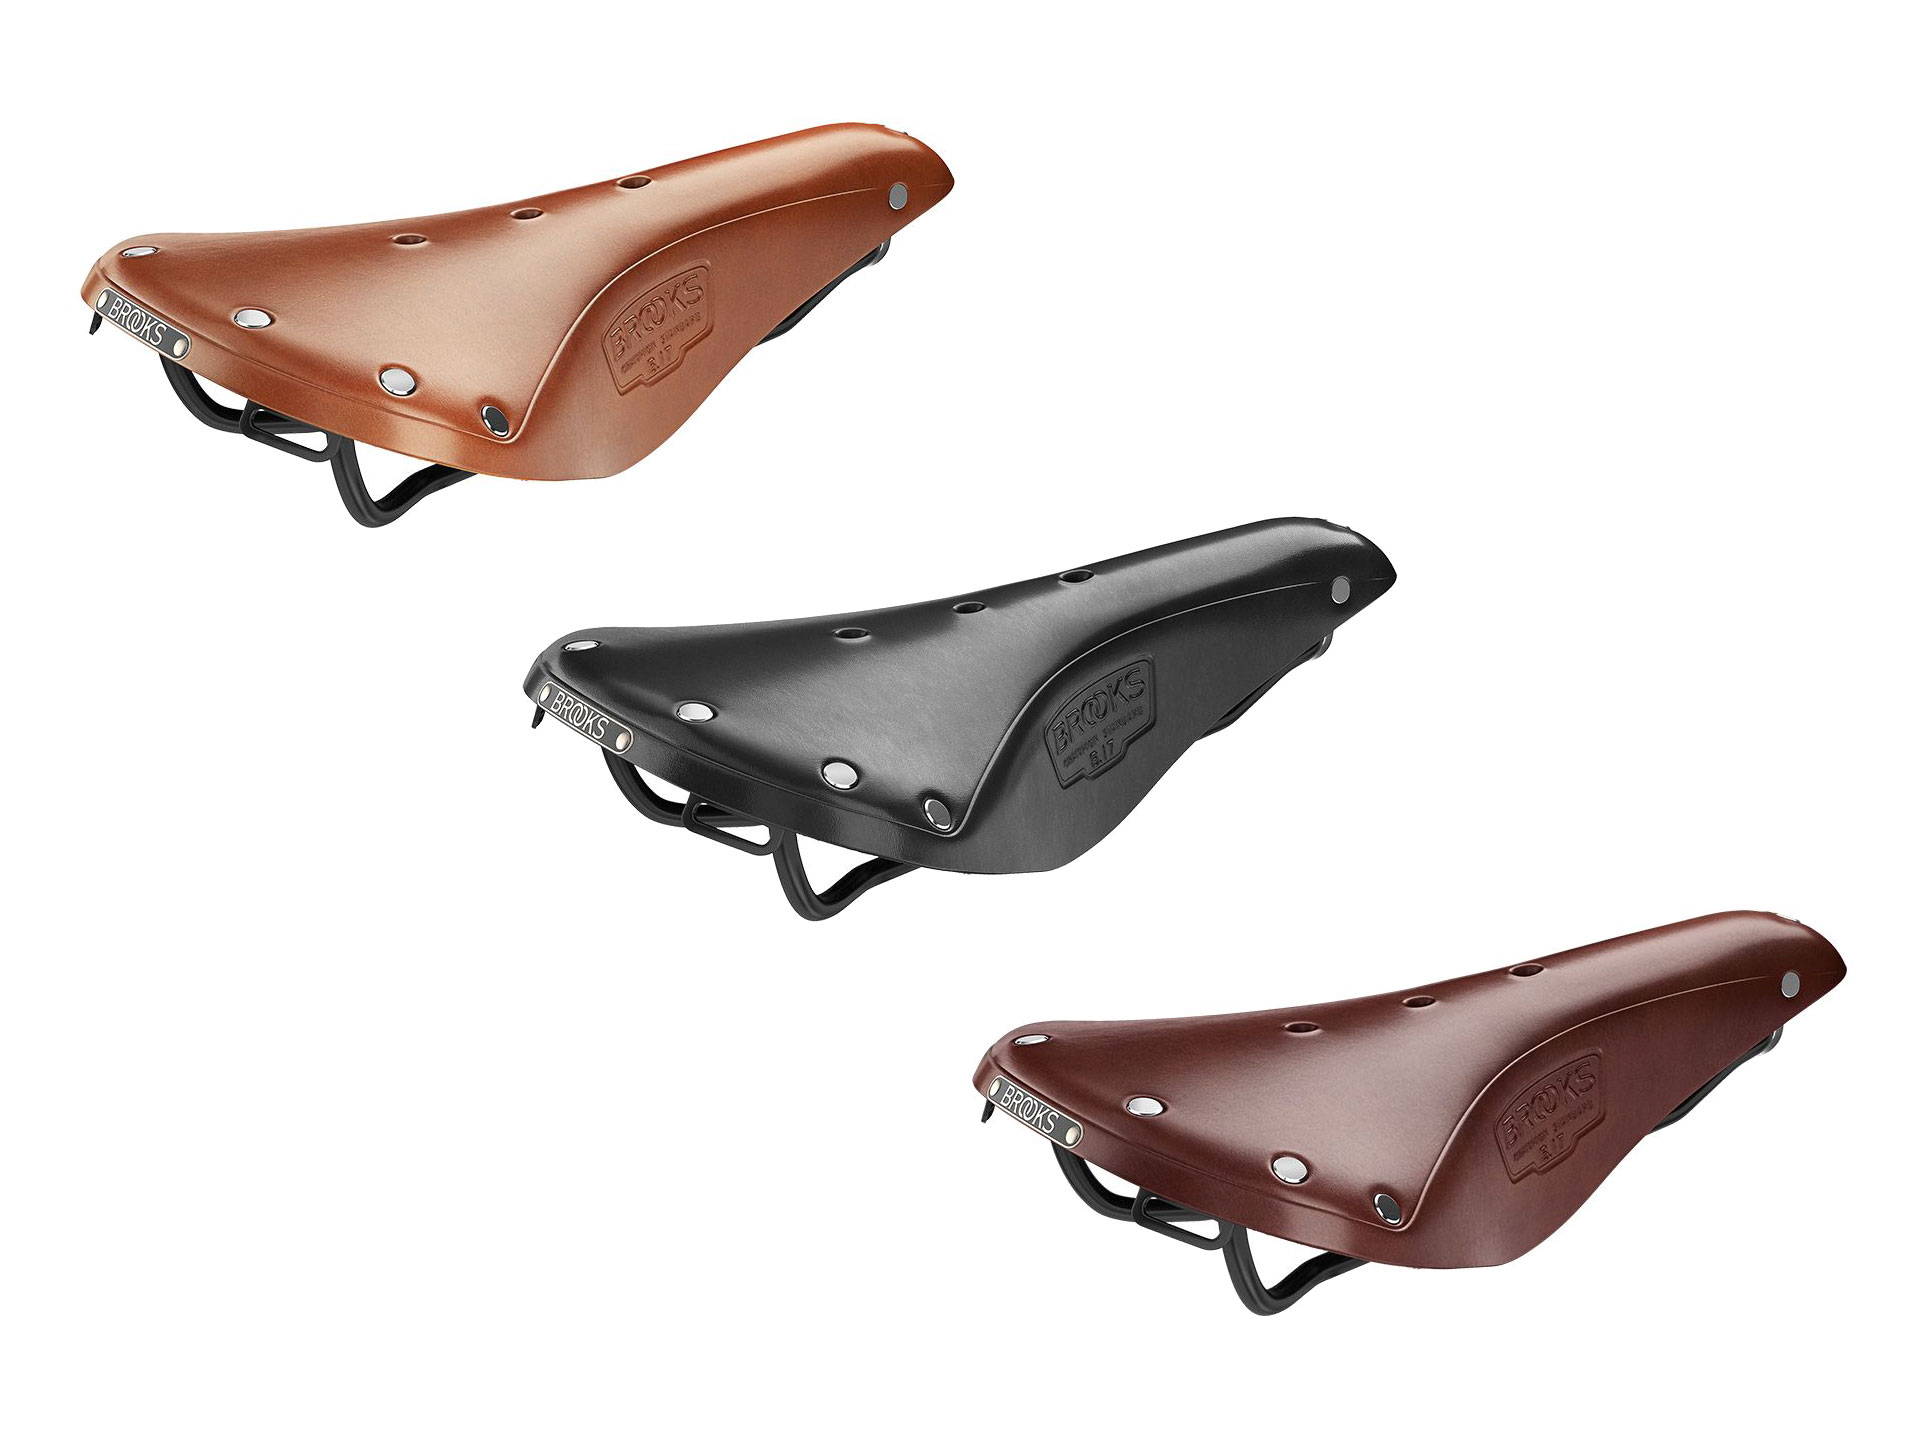 Brooks England B17 Leather Saddle - Handcrafted in England